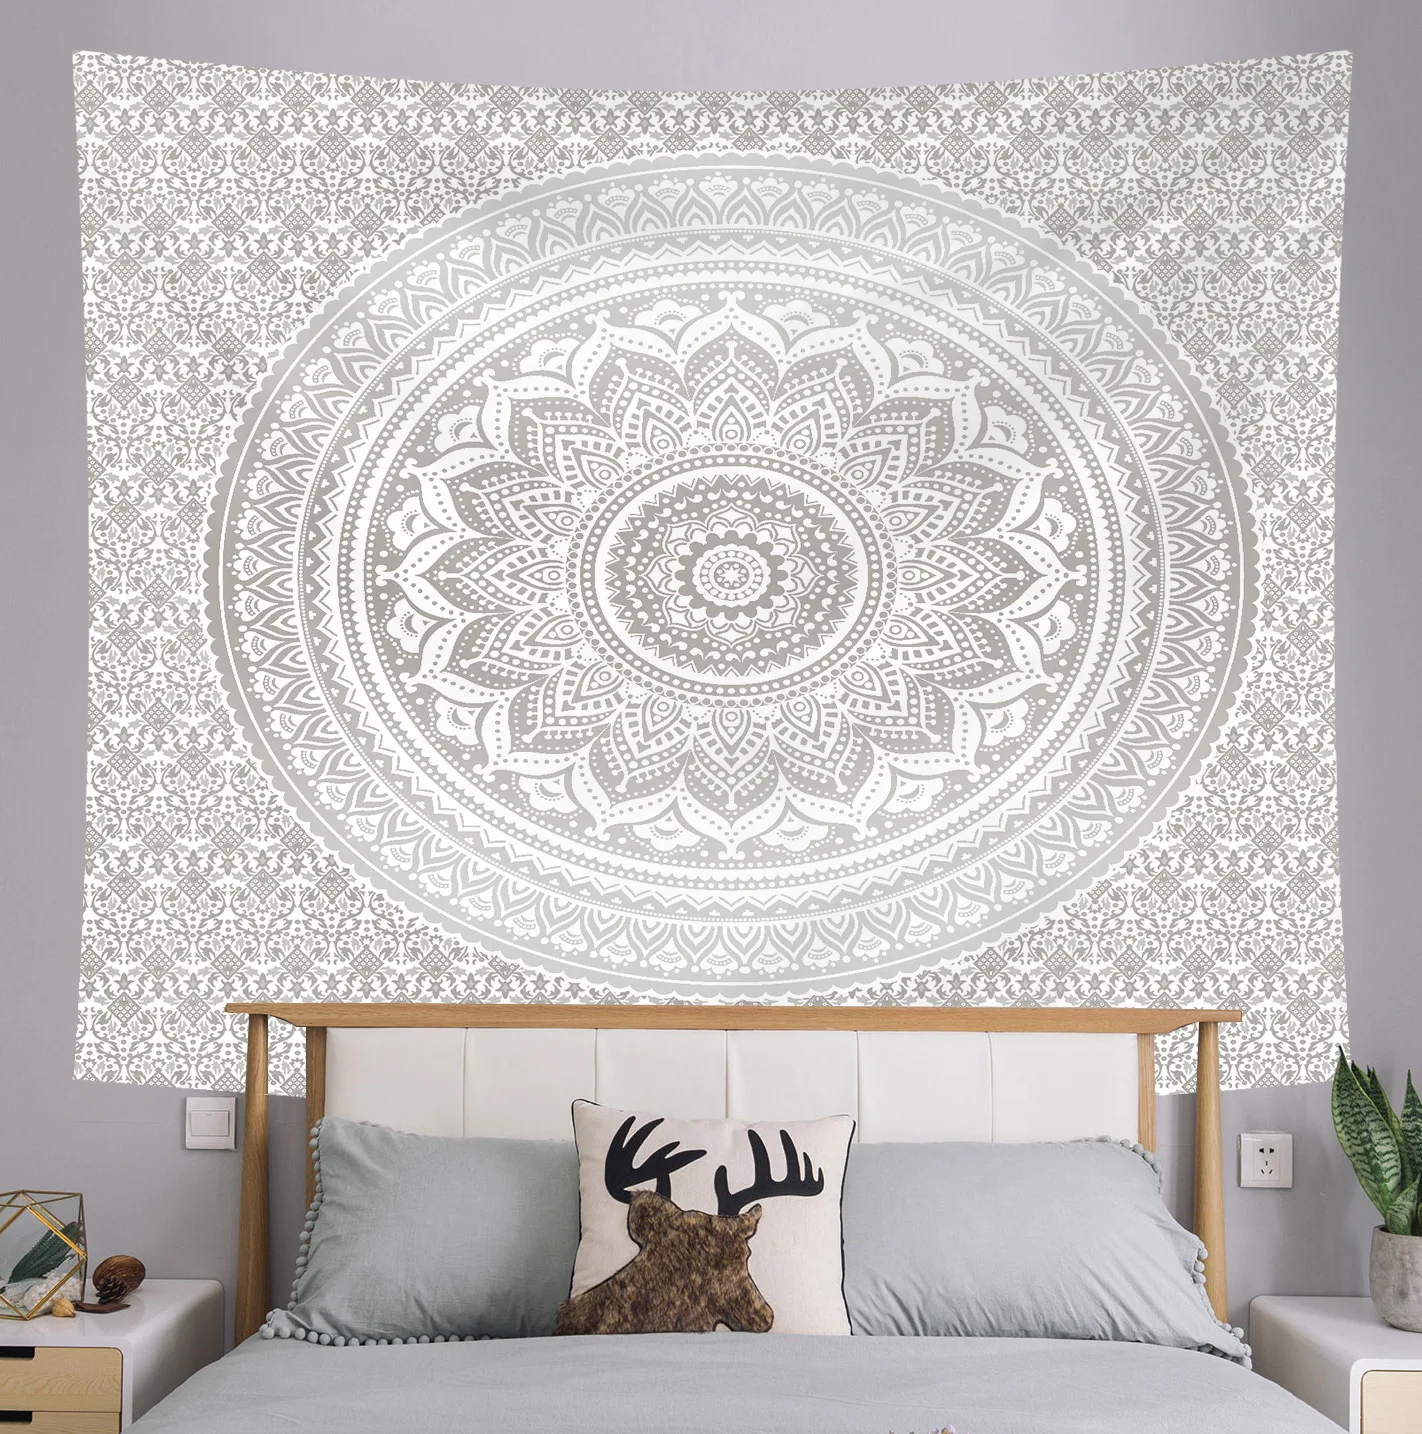 Mandala Tapestry Bedroom Cloth Home Wall Hanging Living Room Background Cover Cotton Thick Decor Art Spiritual Practices India images - 6